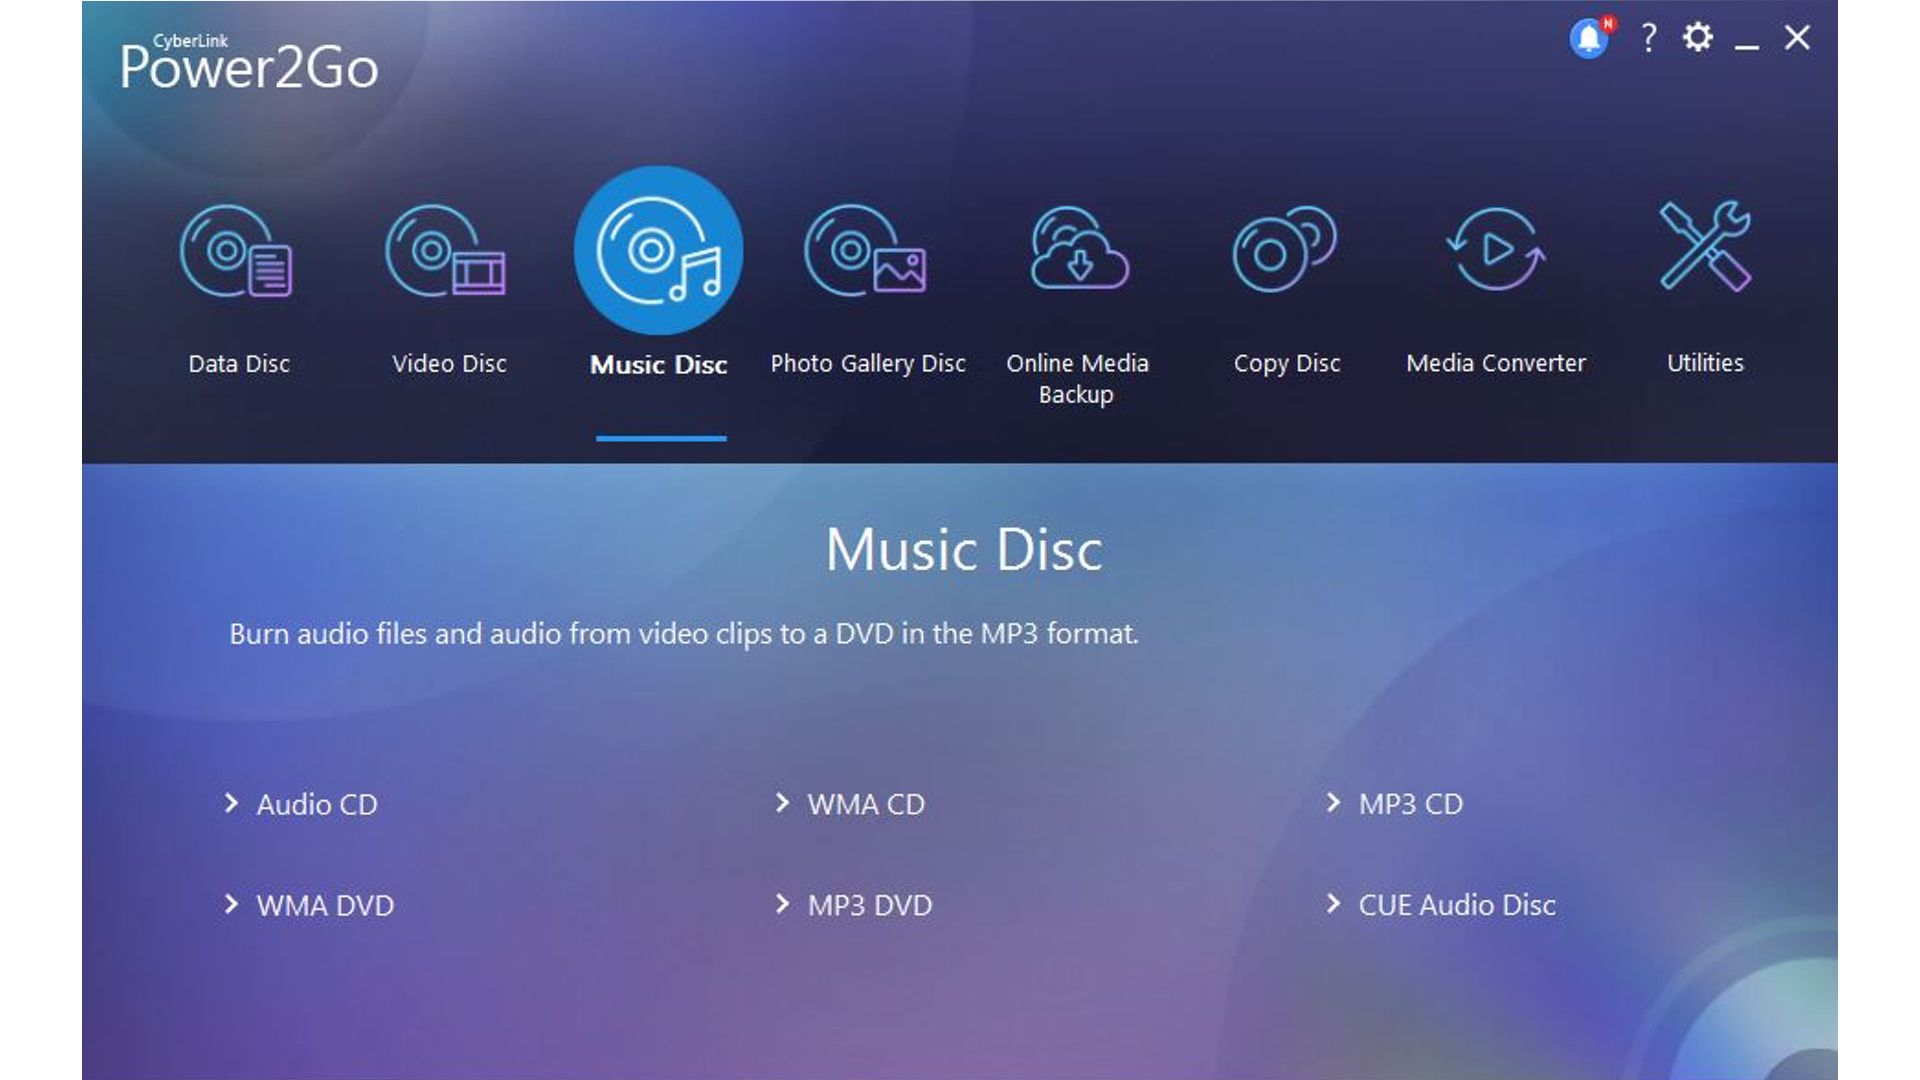 The Power2Go interface open to the &quot;Music Disc&quot; window